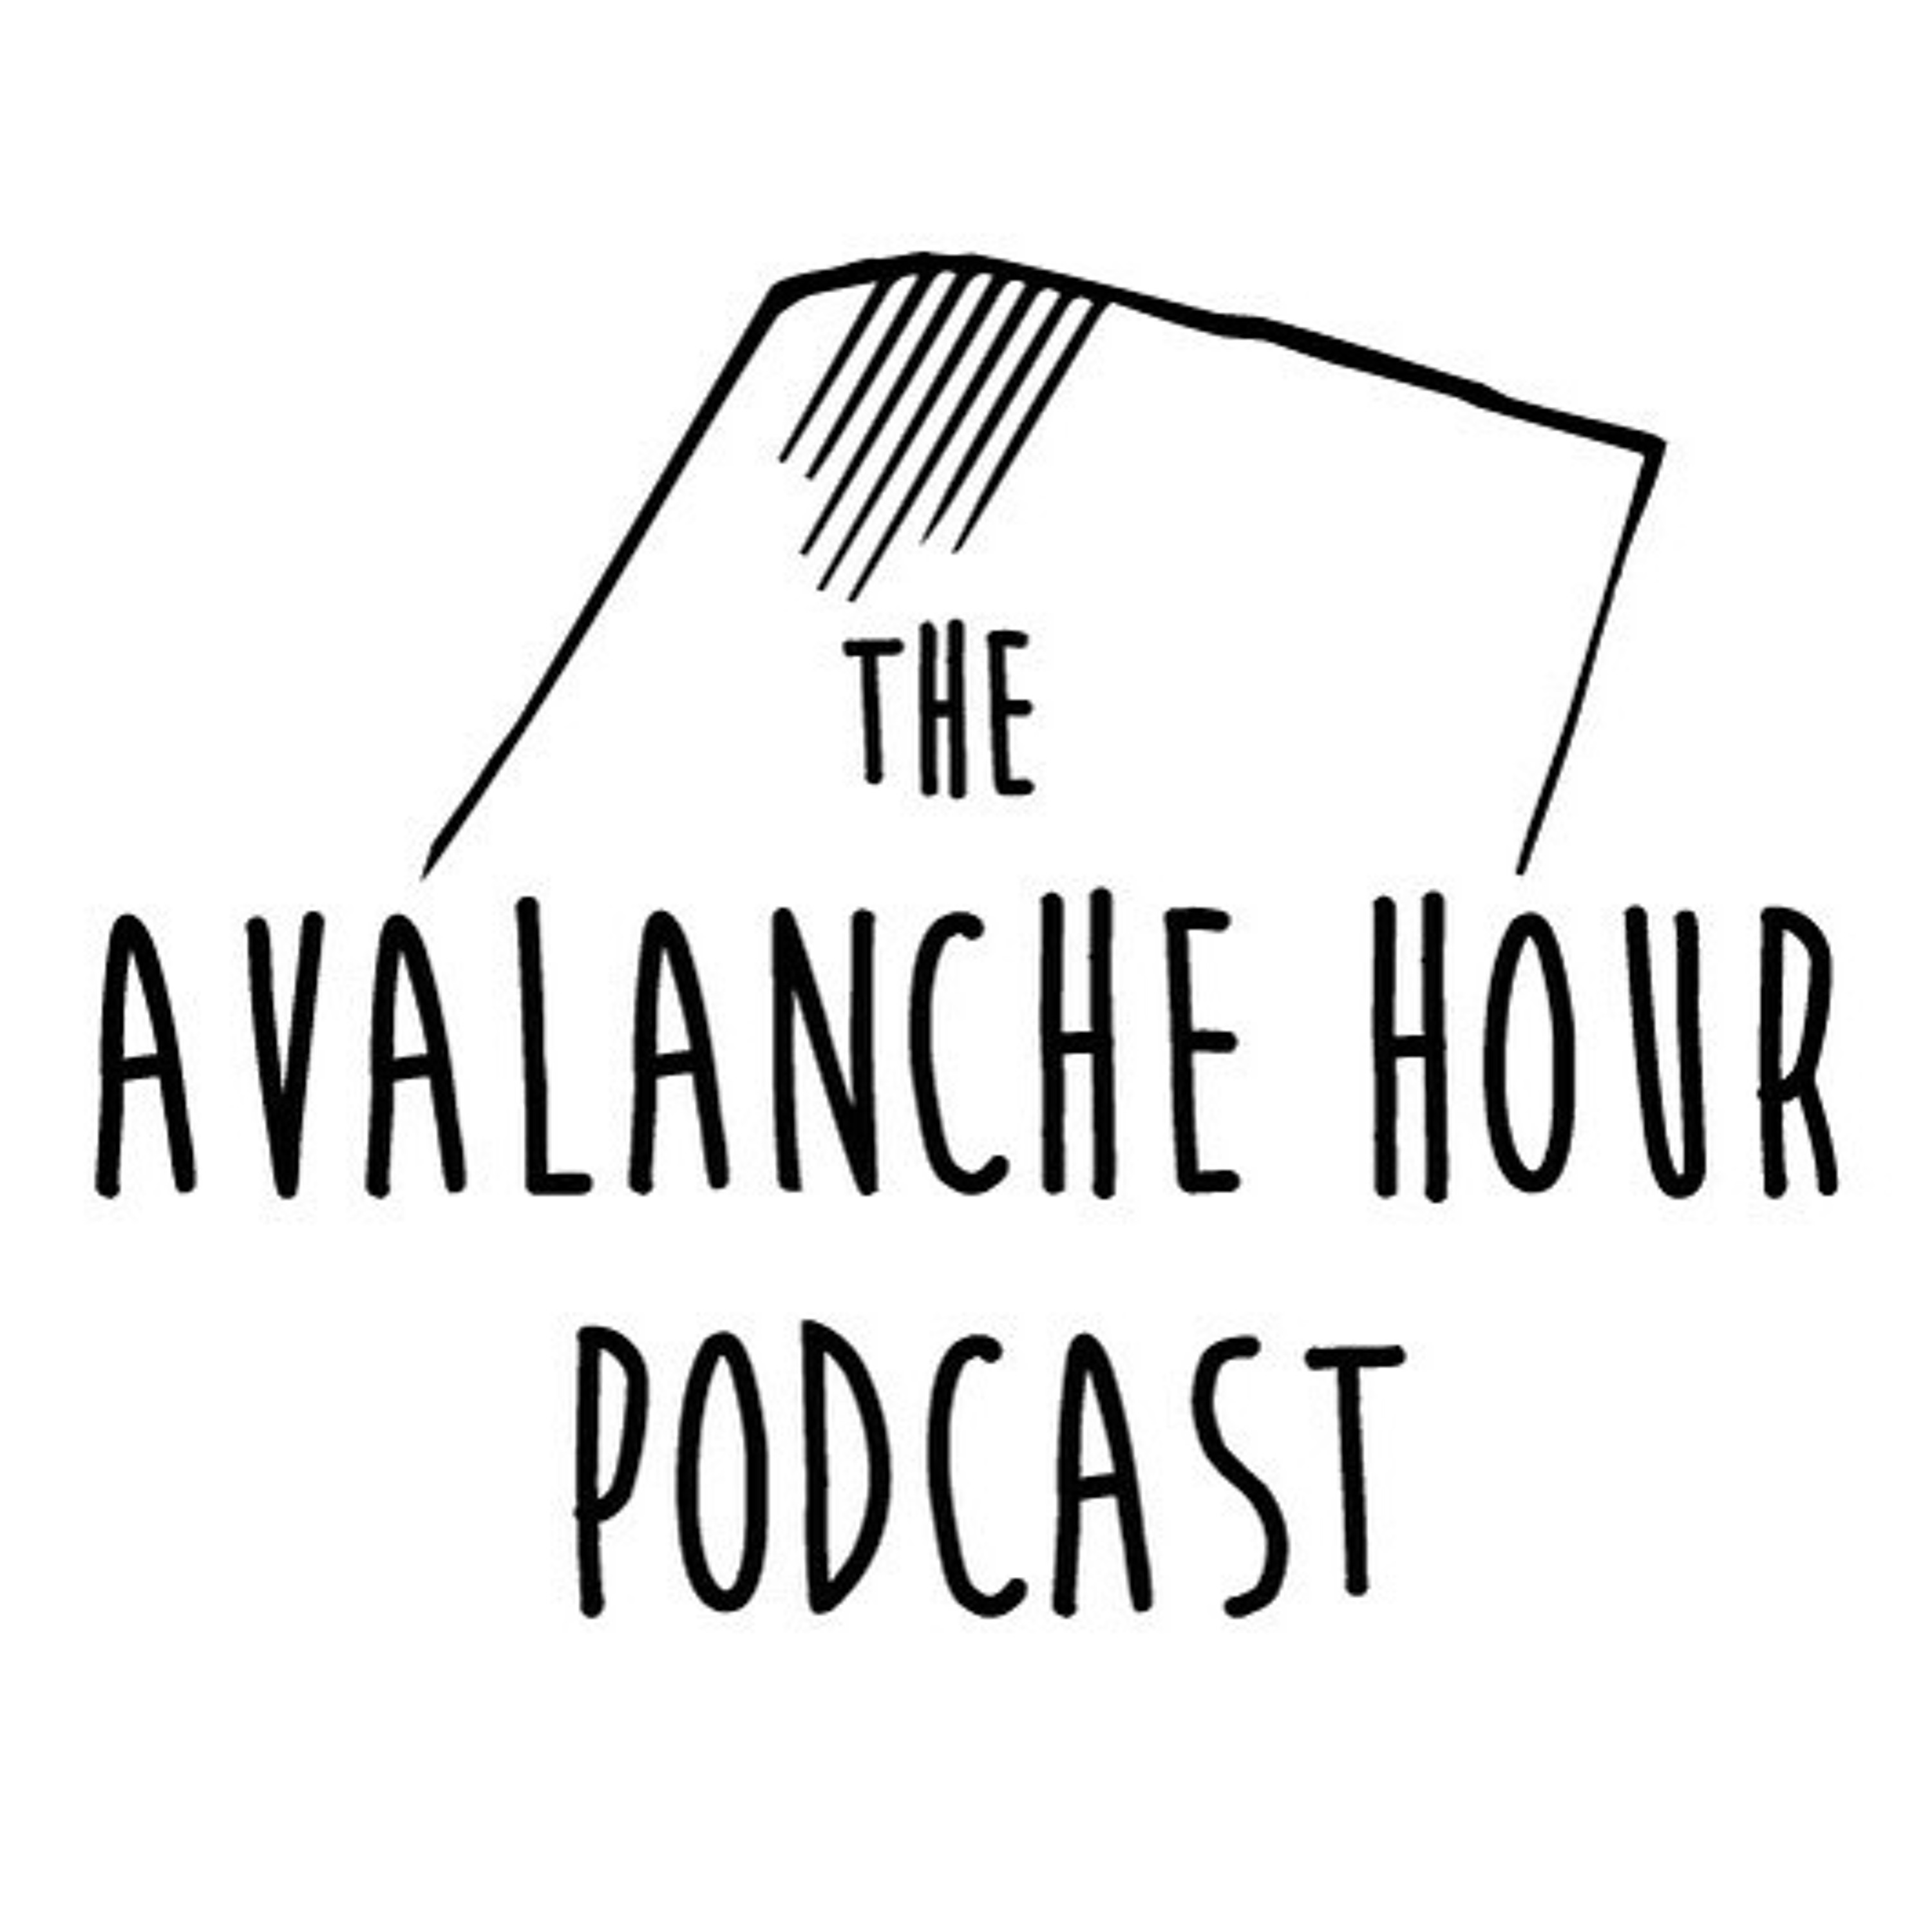 The Avalanche Hour Podcast Episode 4.7 CJ Svela and Laura Maguire